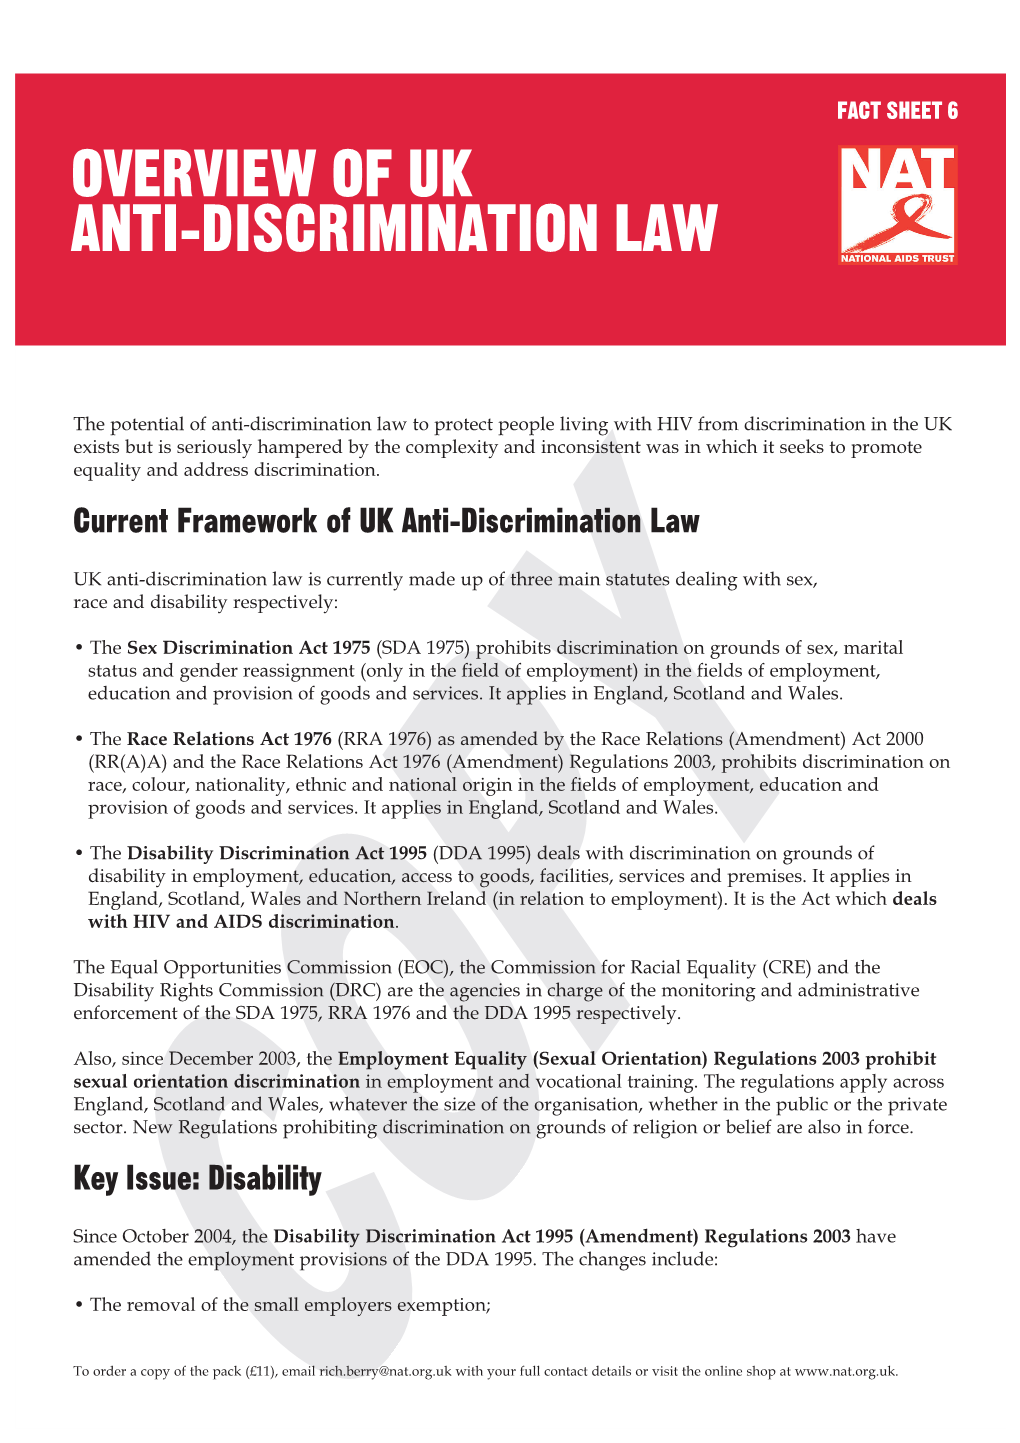 Overview of Uk Anti-Discrimination Law